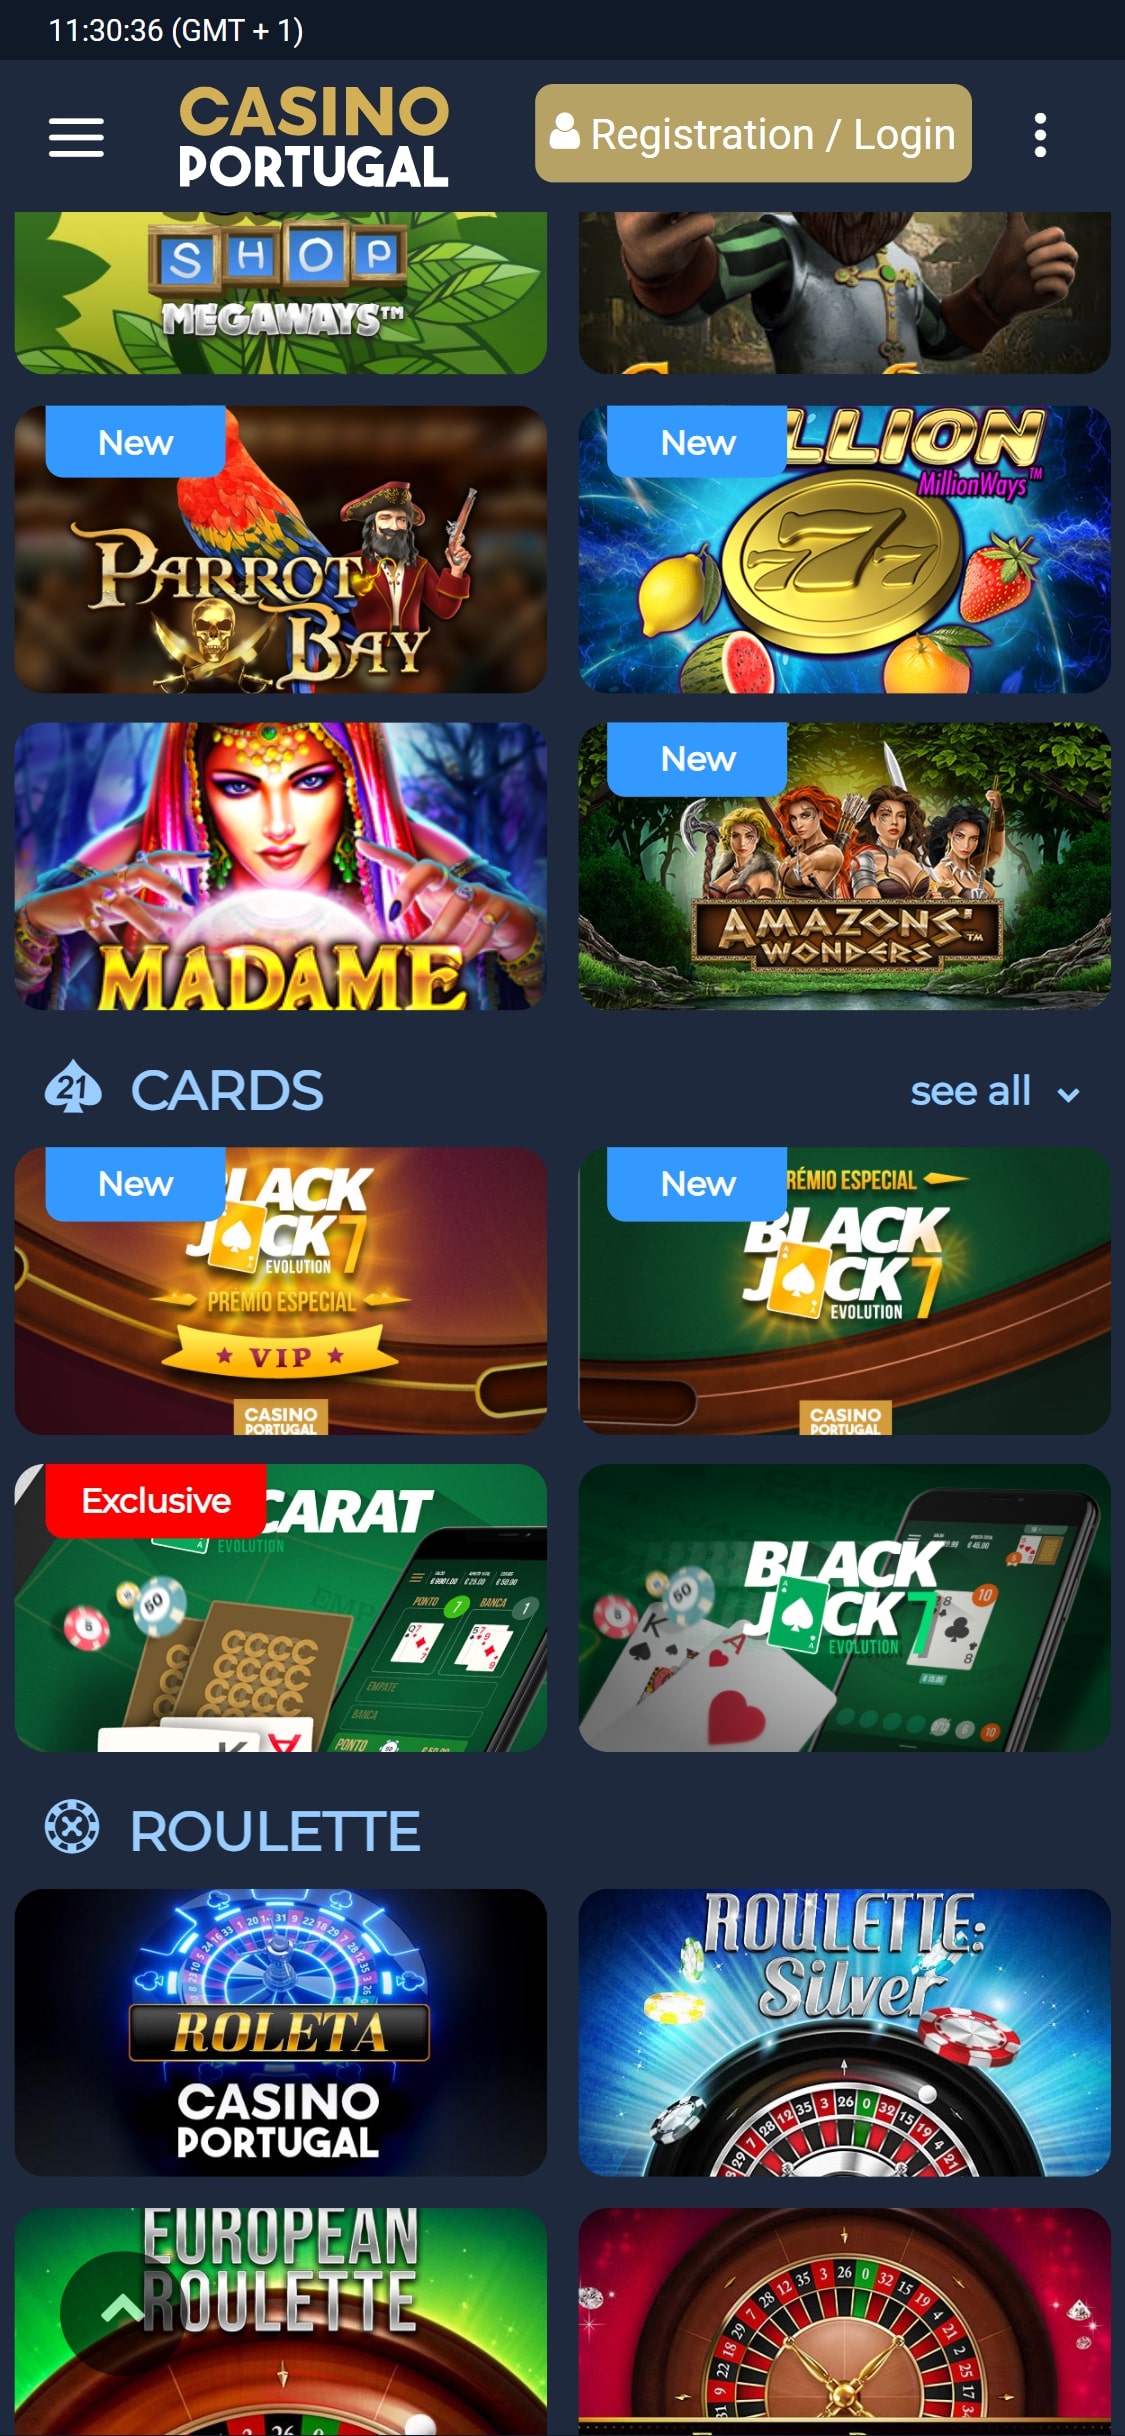 Casino Portugal Mobile Games Review